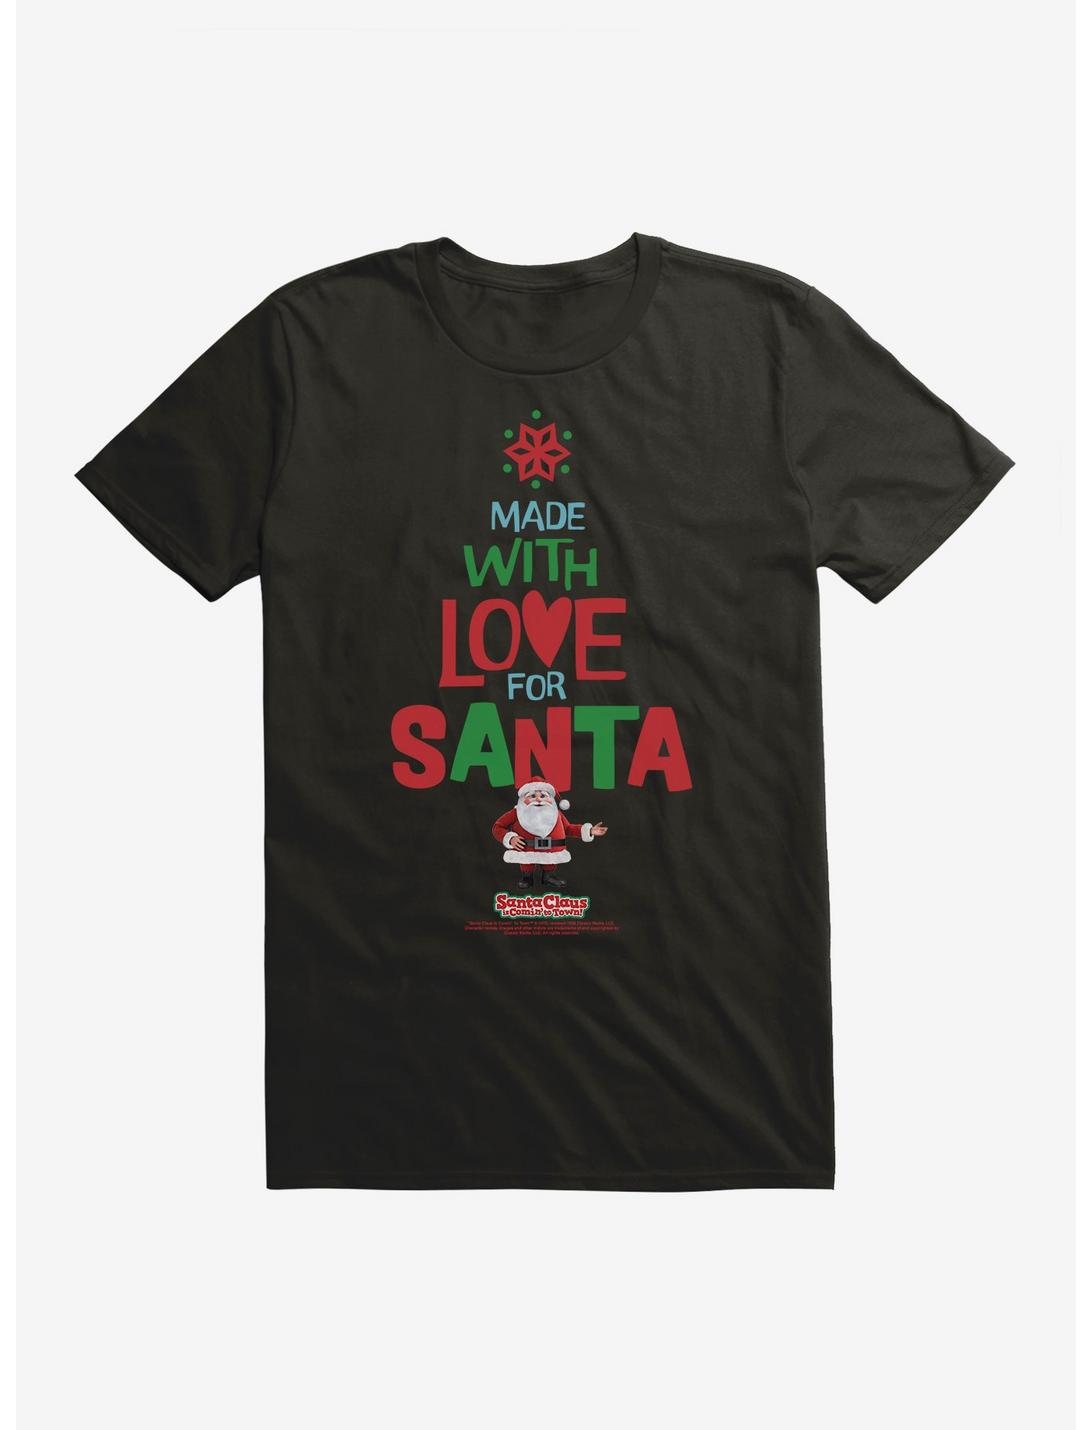 Santa Claus Is Comin' To Town! Made With Love For Santa T-Shirt, , hi-res